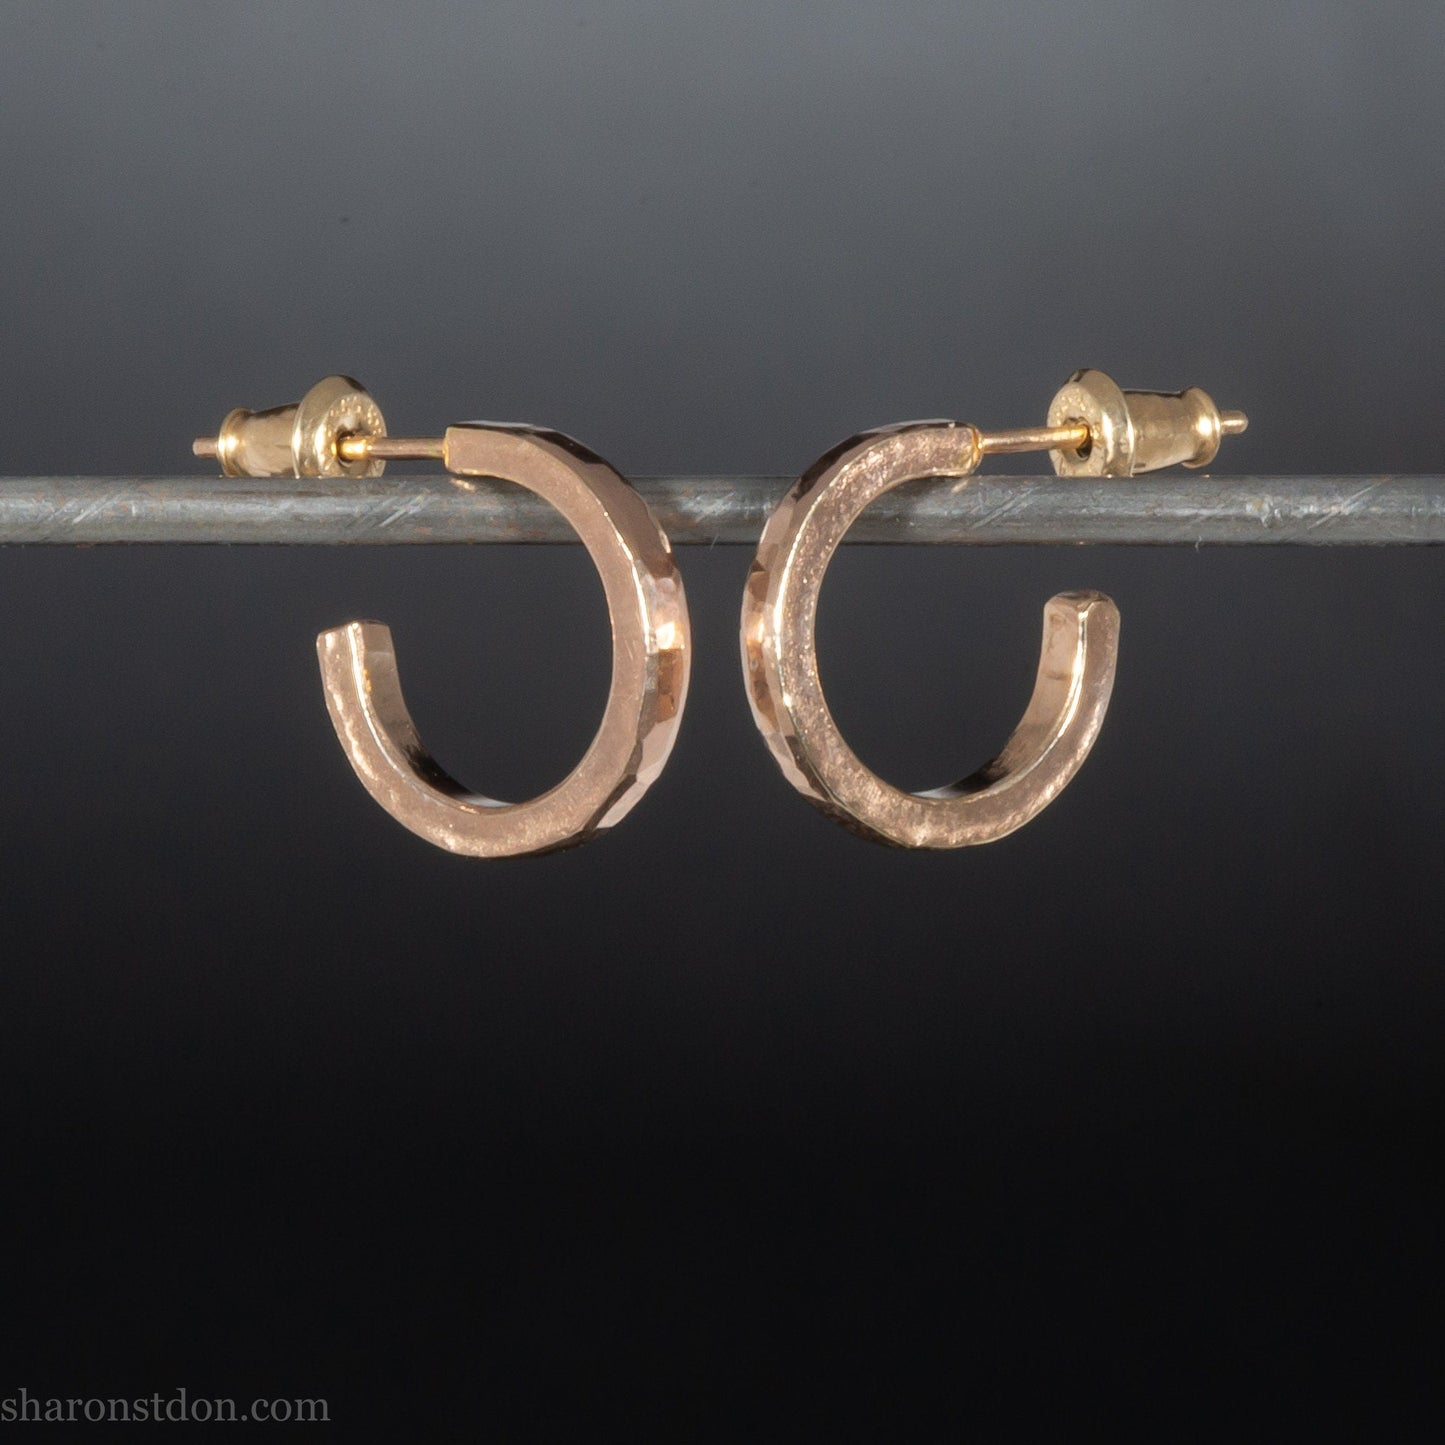 Solid 22k gold hoop earrings handmade in North America by Sharon Saint Don.  14mm diameter round with hammered texture.  18k solid gold posts and locking backs. Handmade in the USA.